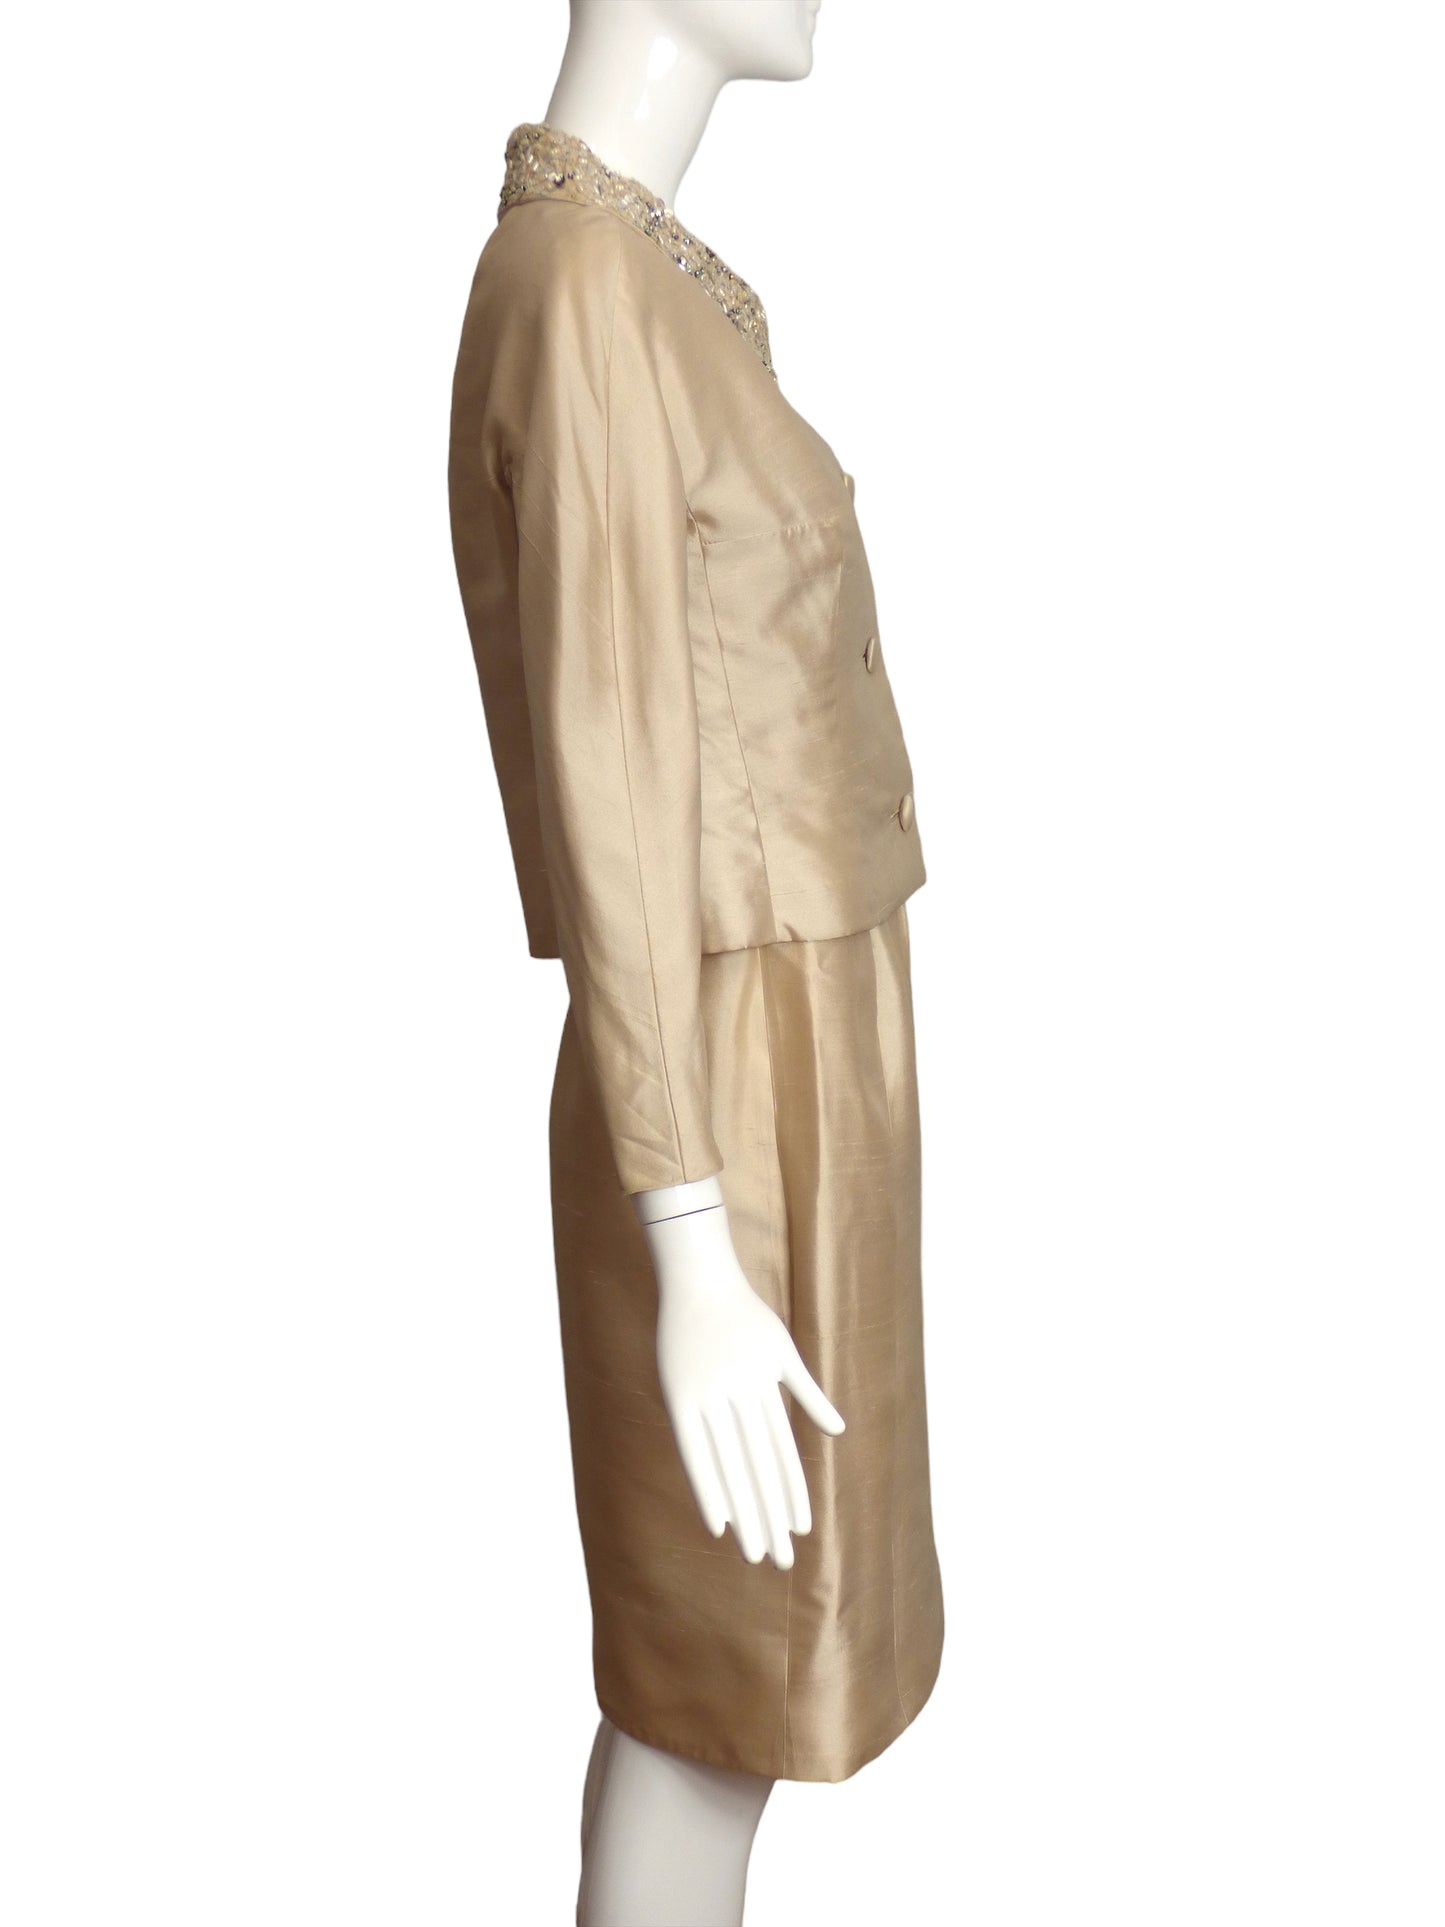 CHARLES COOPER- 1960s Ivory Beaded Skirt Suit, Size 6